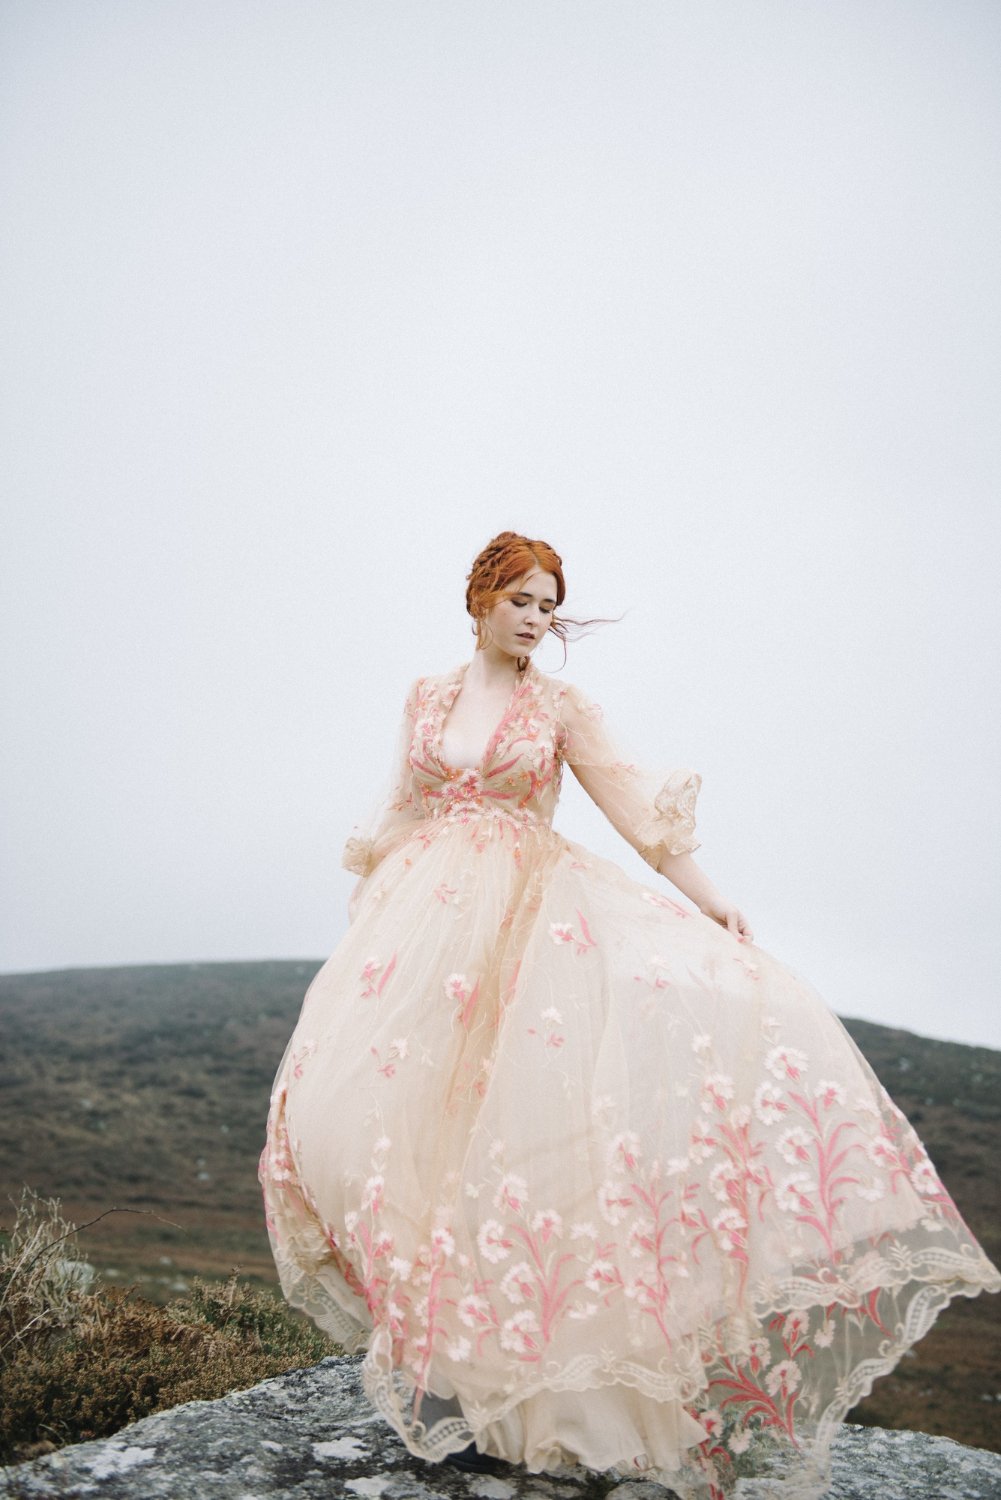 ginger female with a pure white skin in an attractive pink gown